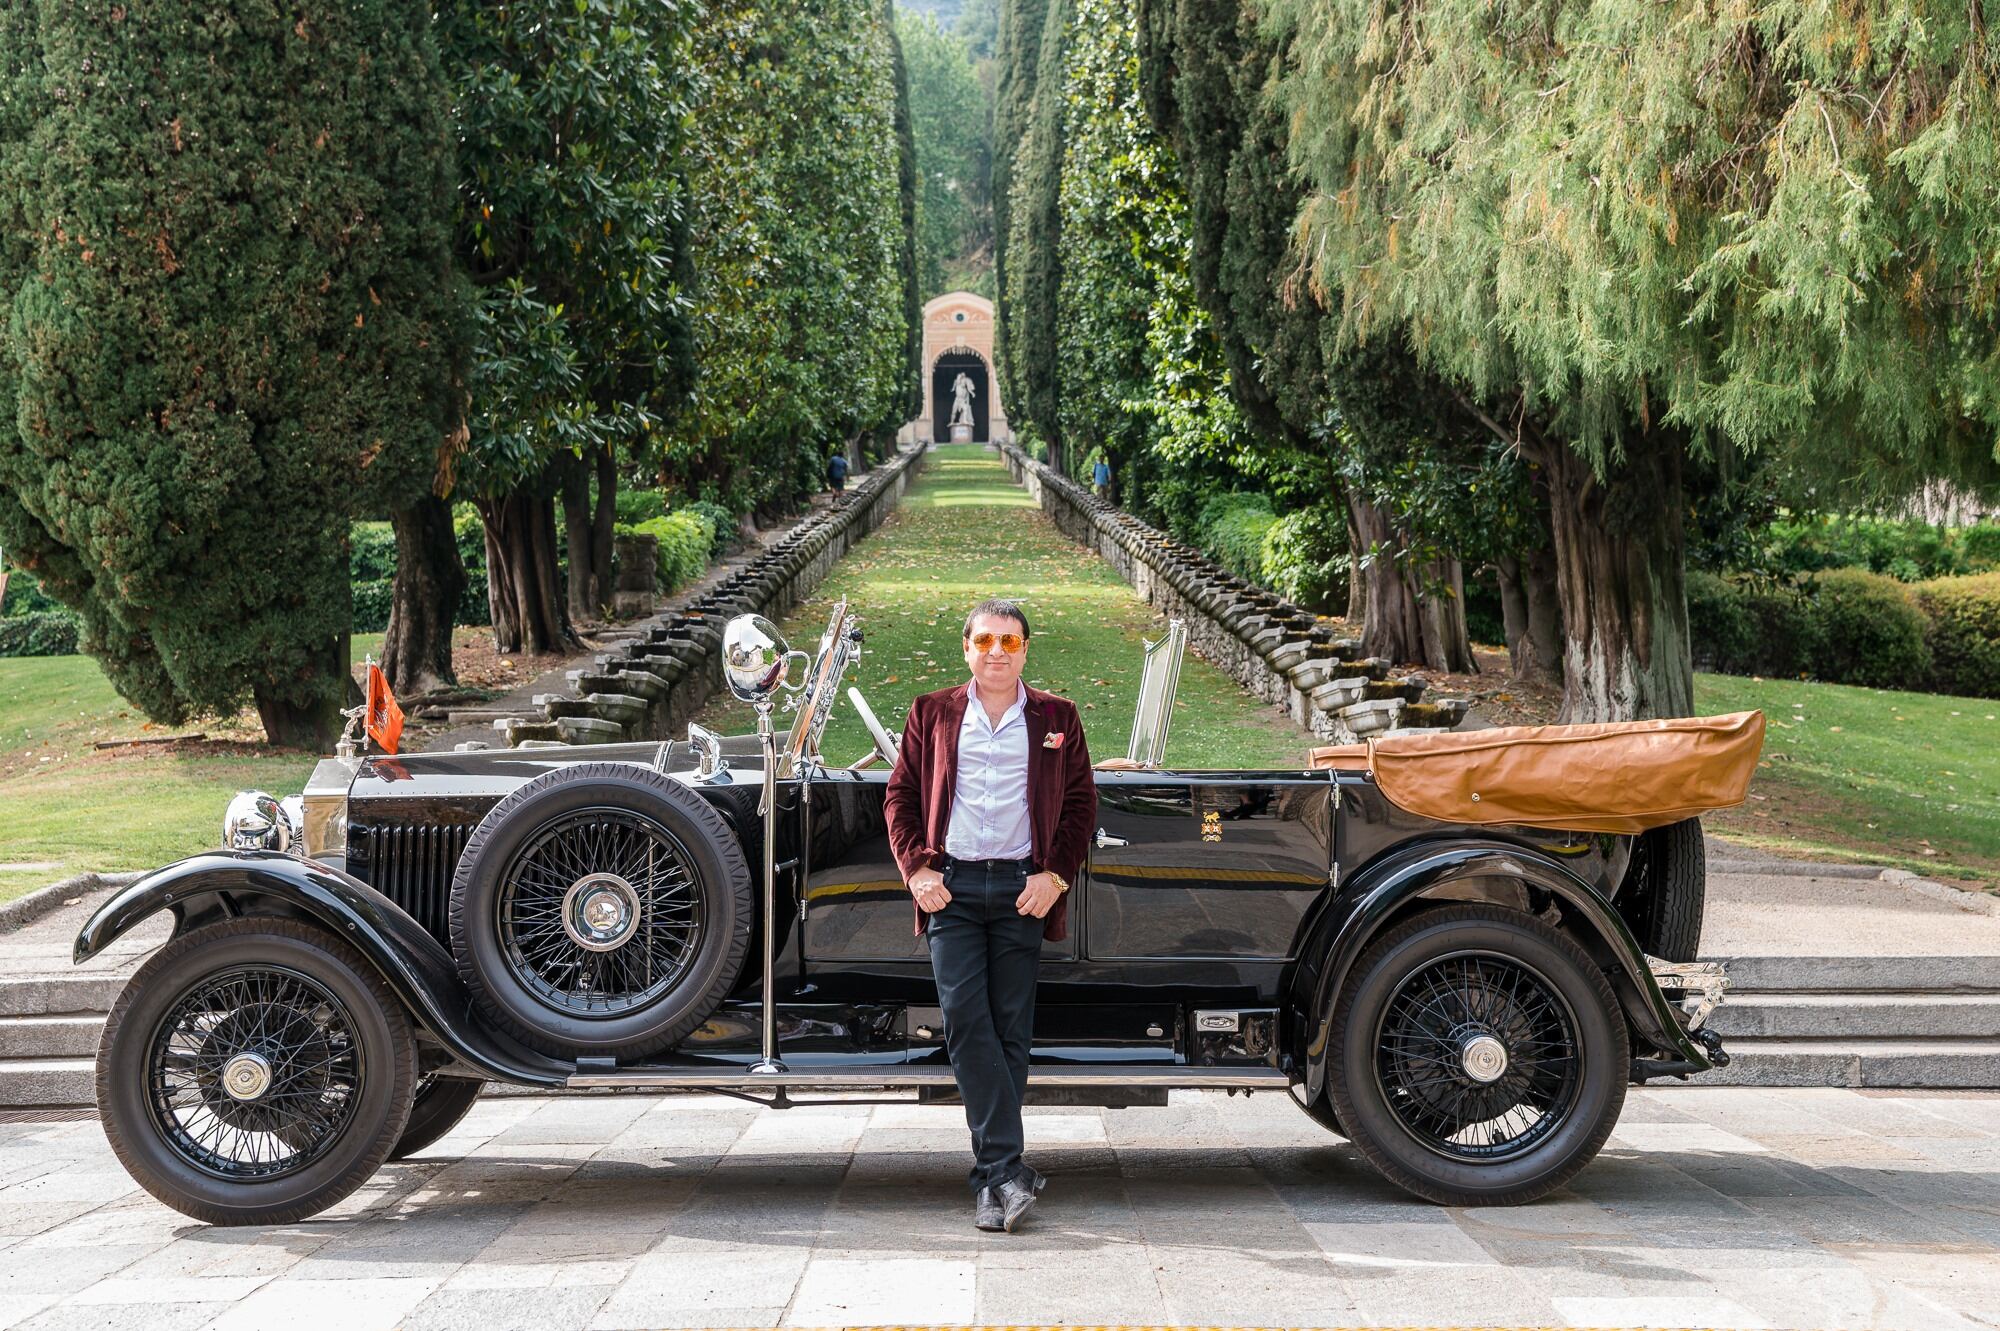 Yohan Poonawalla: A Passion For Classic Cars Fit for Royalty